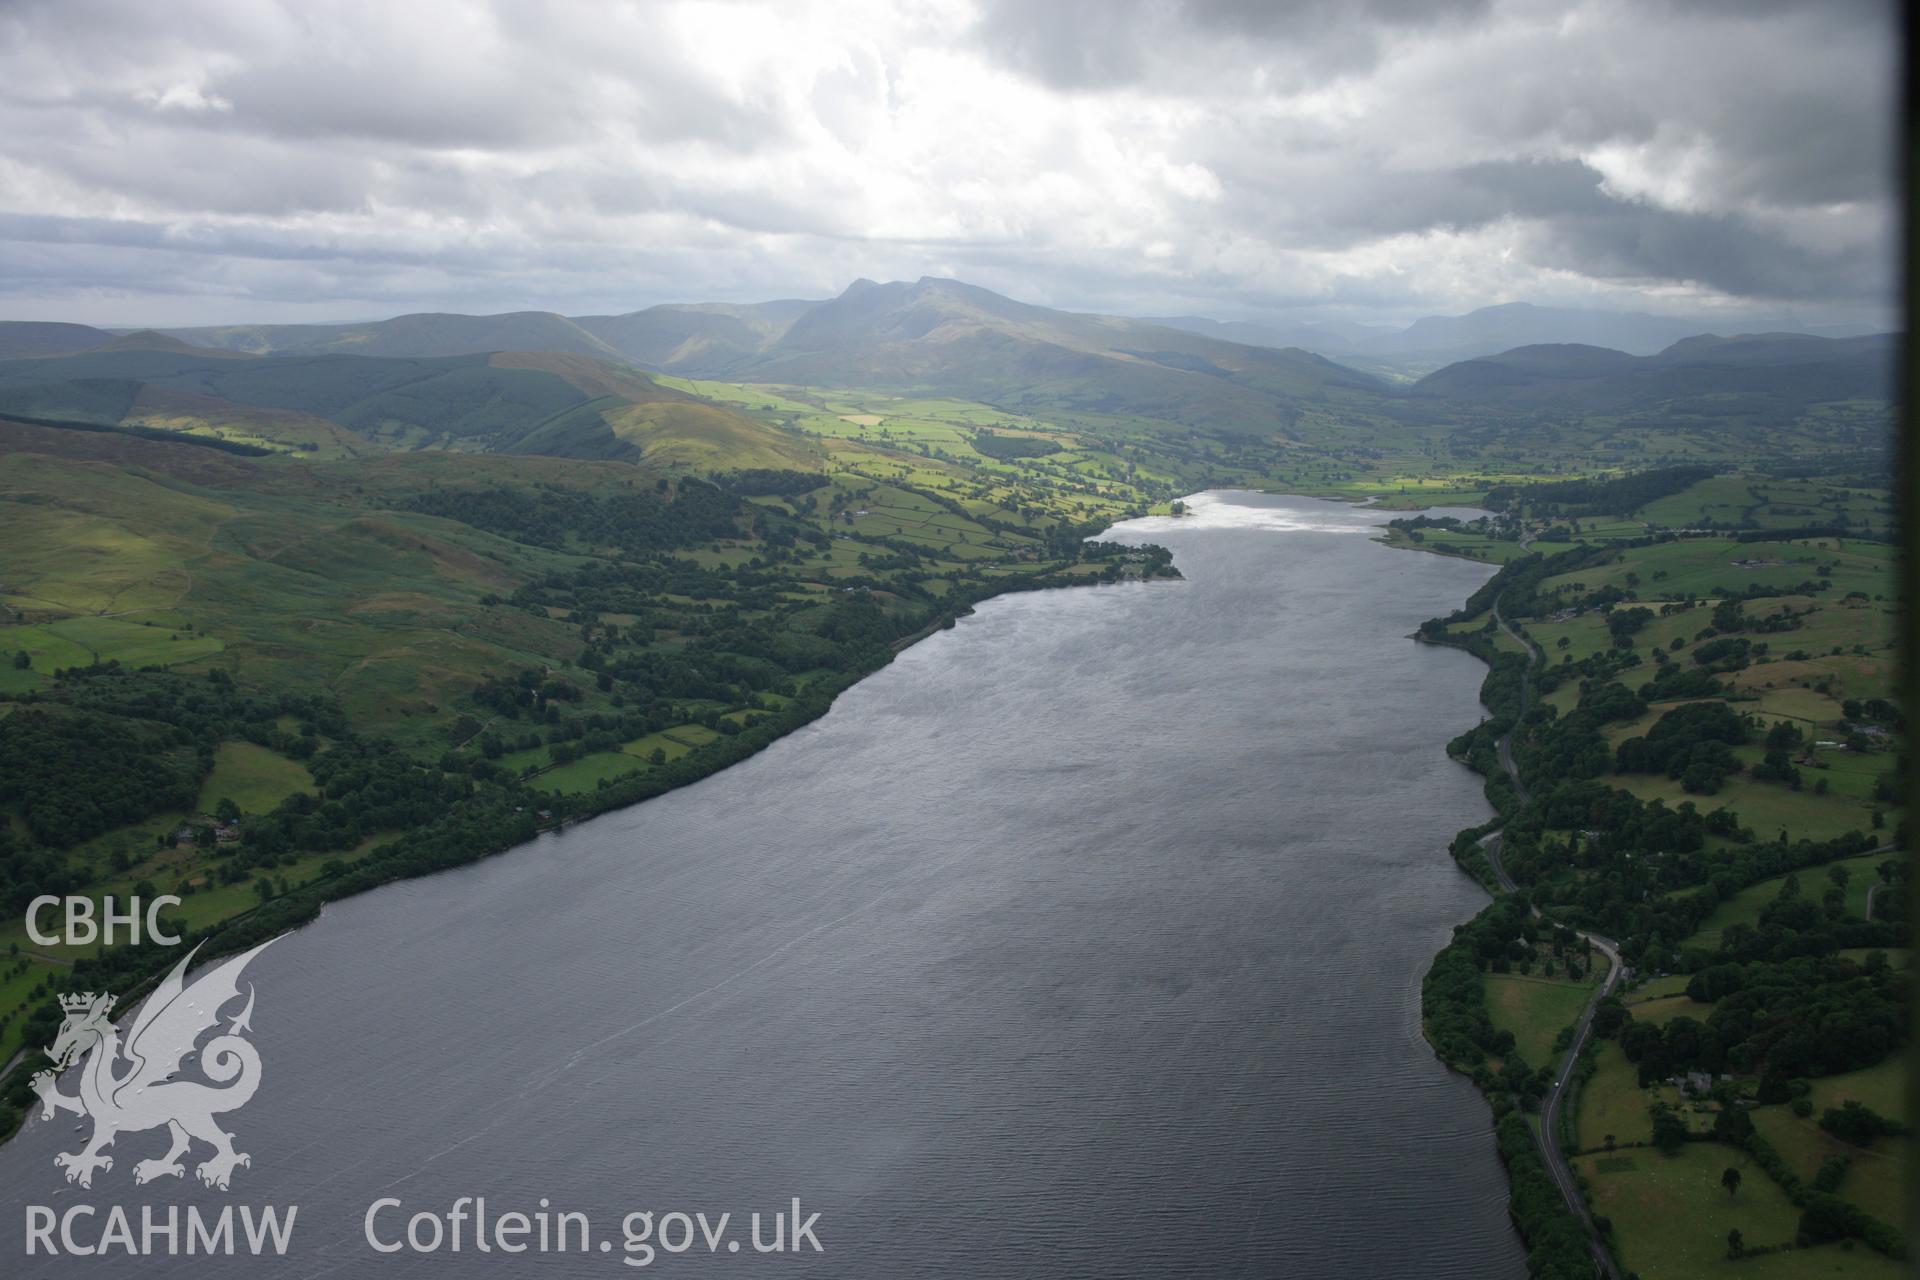 RCAHMW colour oblique aerial photograph of Llyn Tegid (Bala Lake), viewed from the north-east. Taken on 31 July 2006 by Toby Driver.